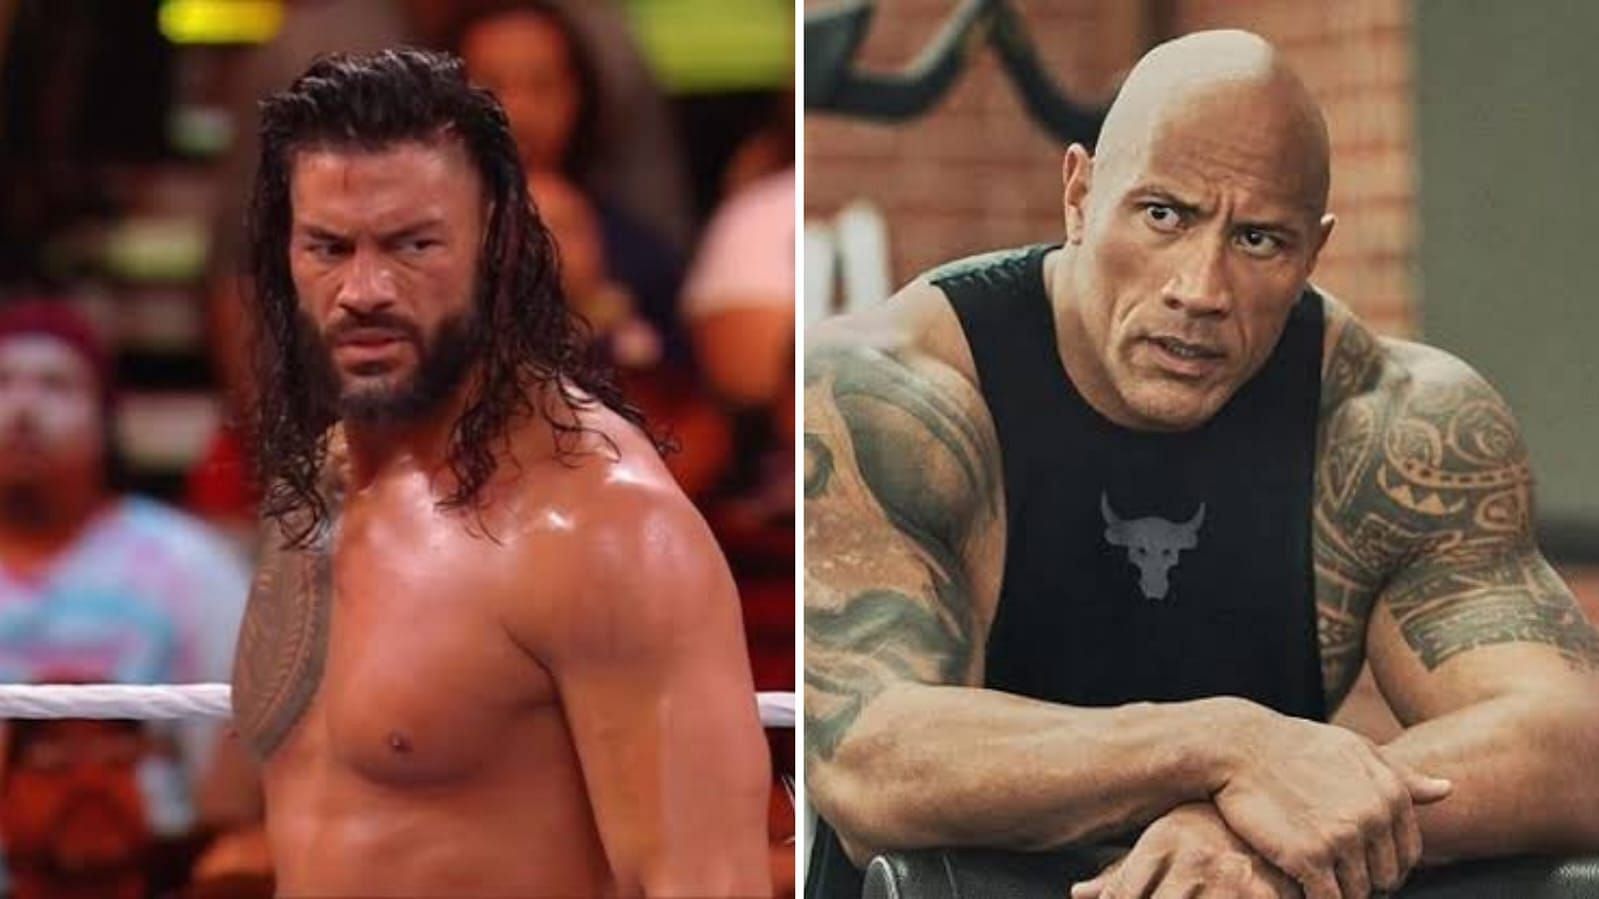 The Rock and Roman Reigns are two of the biggest names in WWE history.